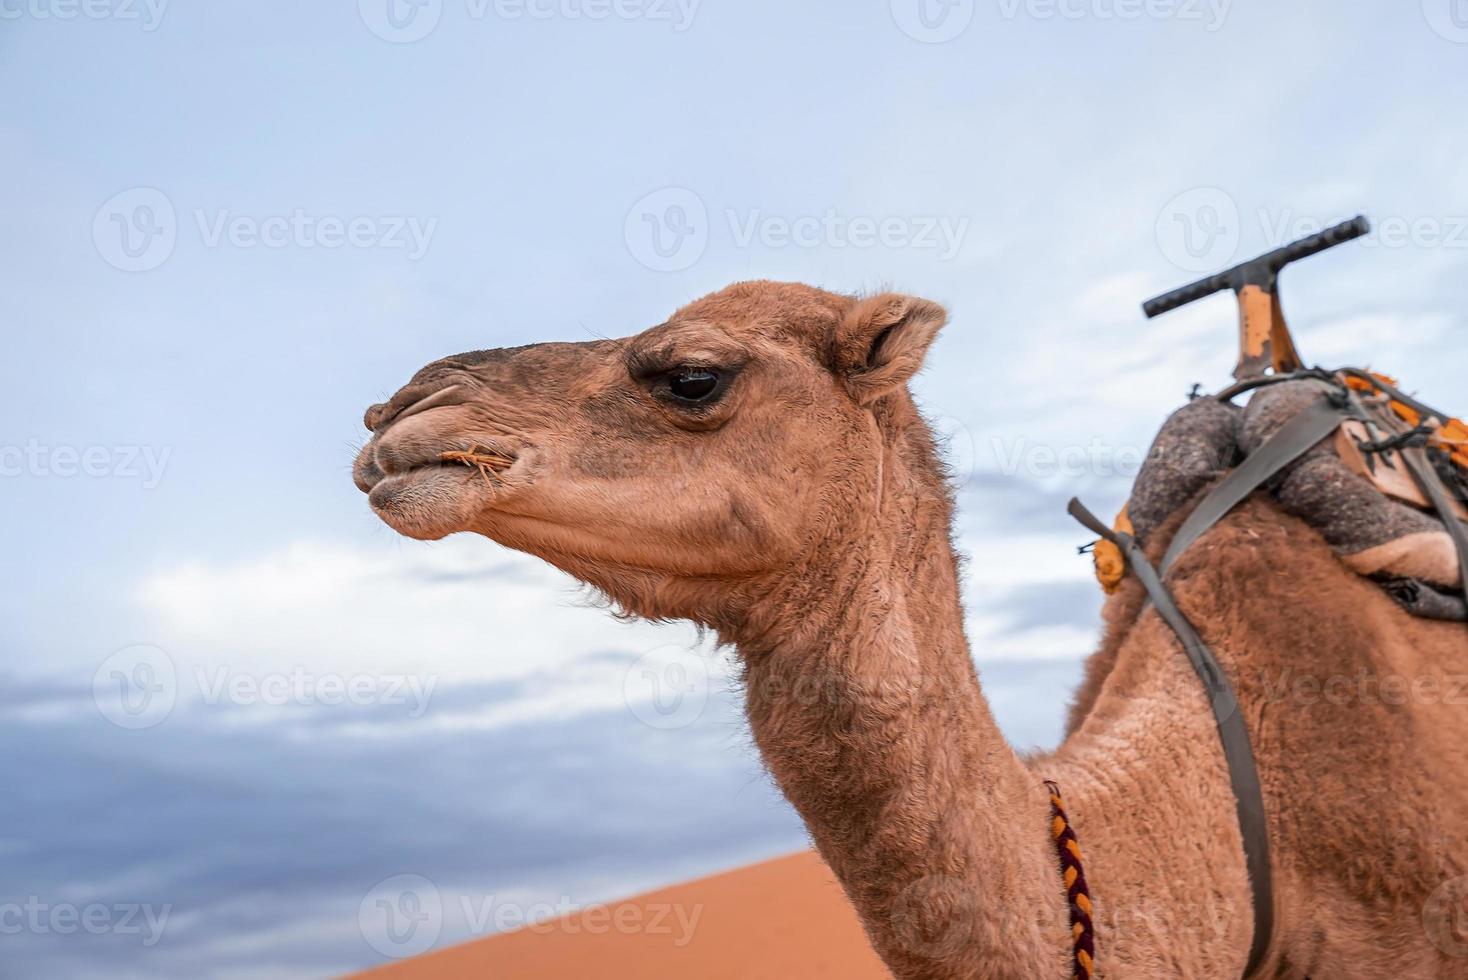 Dromedary brown camels eating grass in desert against cloudy sky photo